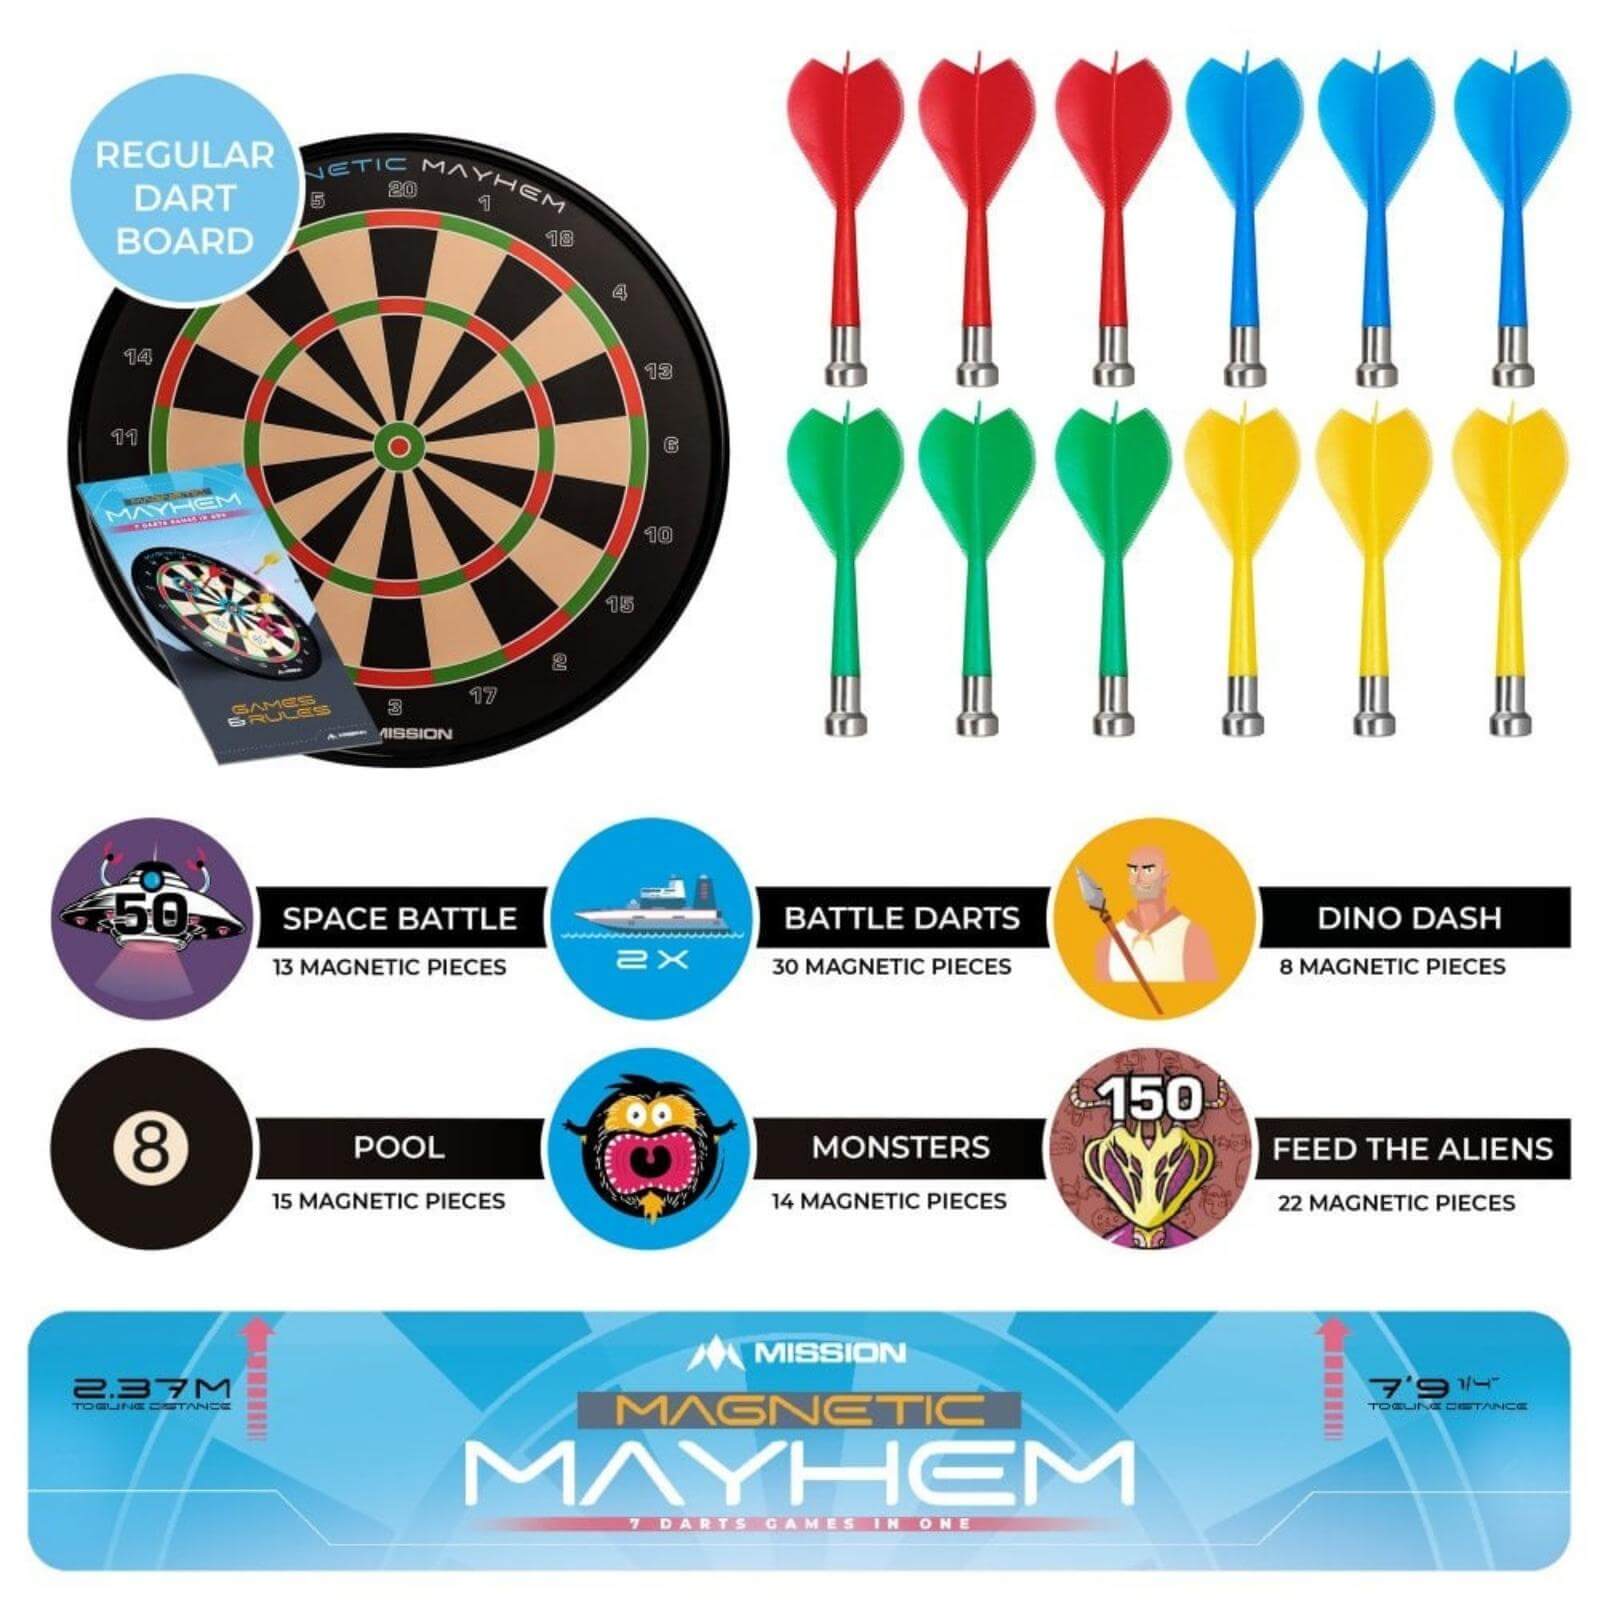 Dartboards - Mission - Magnetic Mayhem - A Fun And Safe Magnetic Dart Board Set For The Whole Family! 